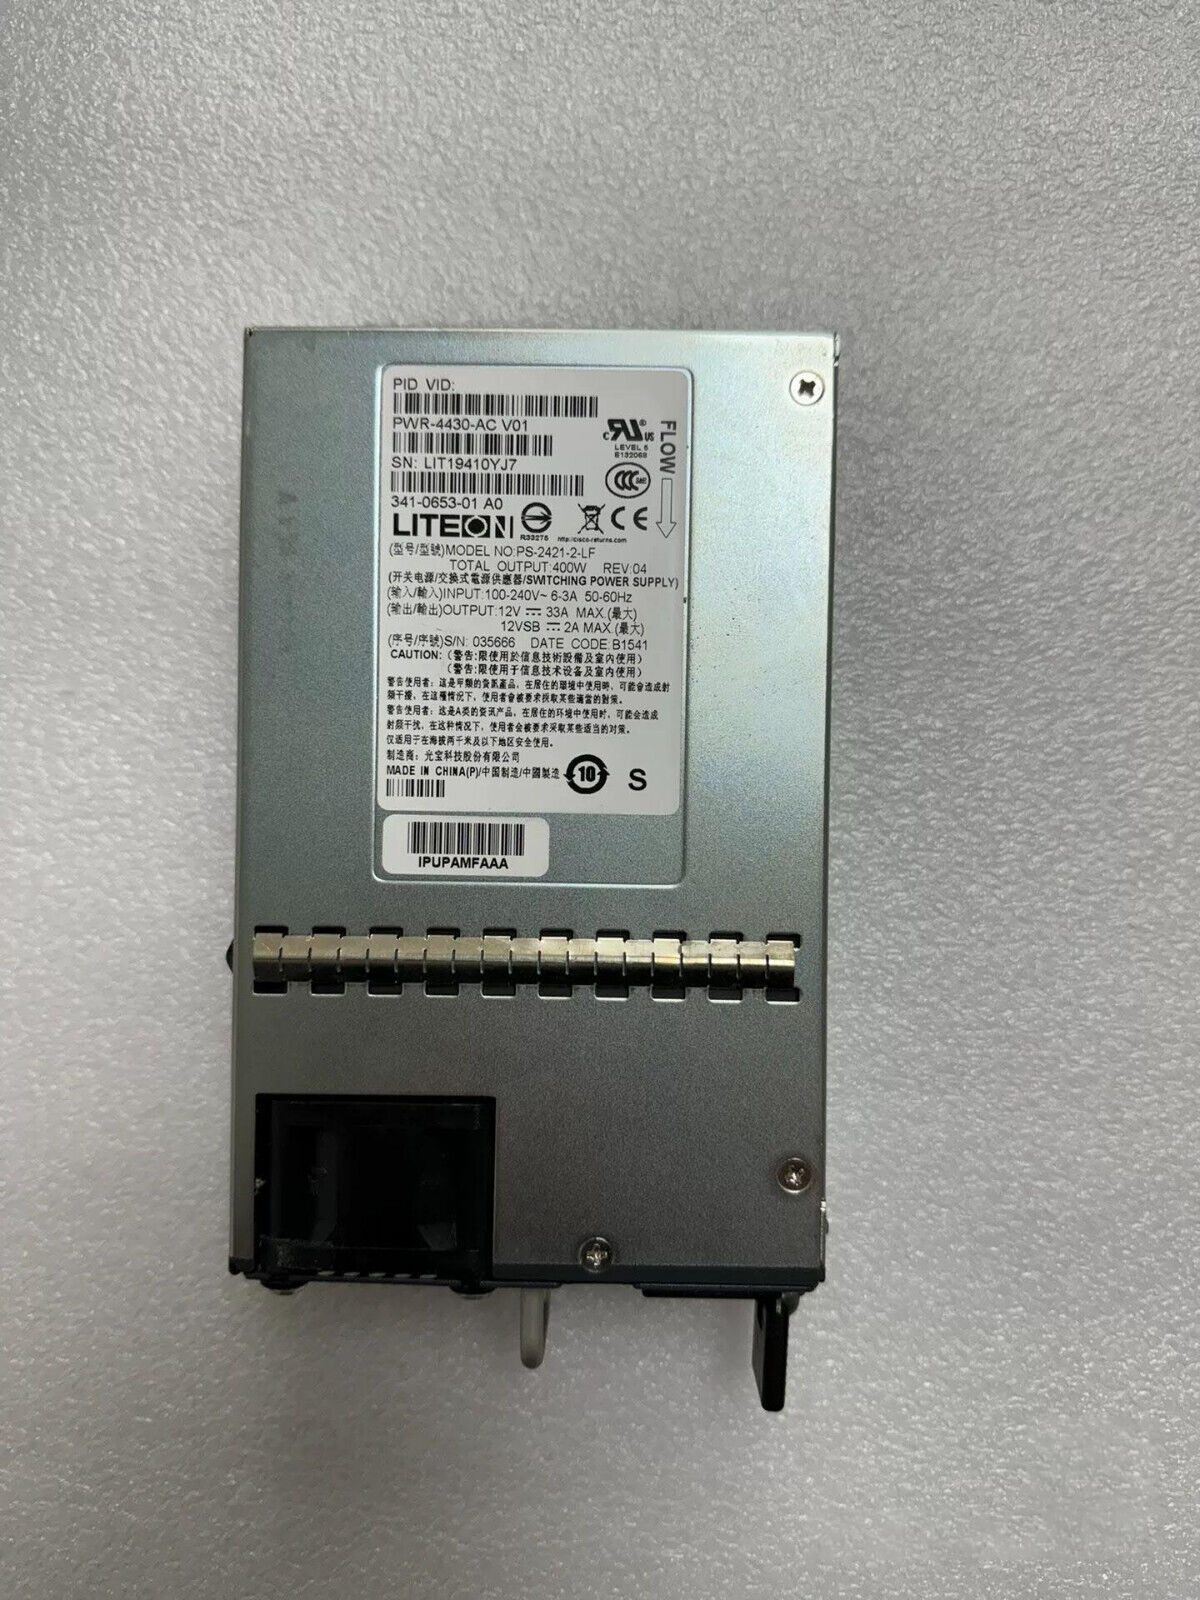 1pcs Cisco PWR-4430-AC Power Supply 341-0653-01 for ISR 4431 series Router